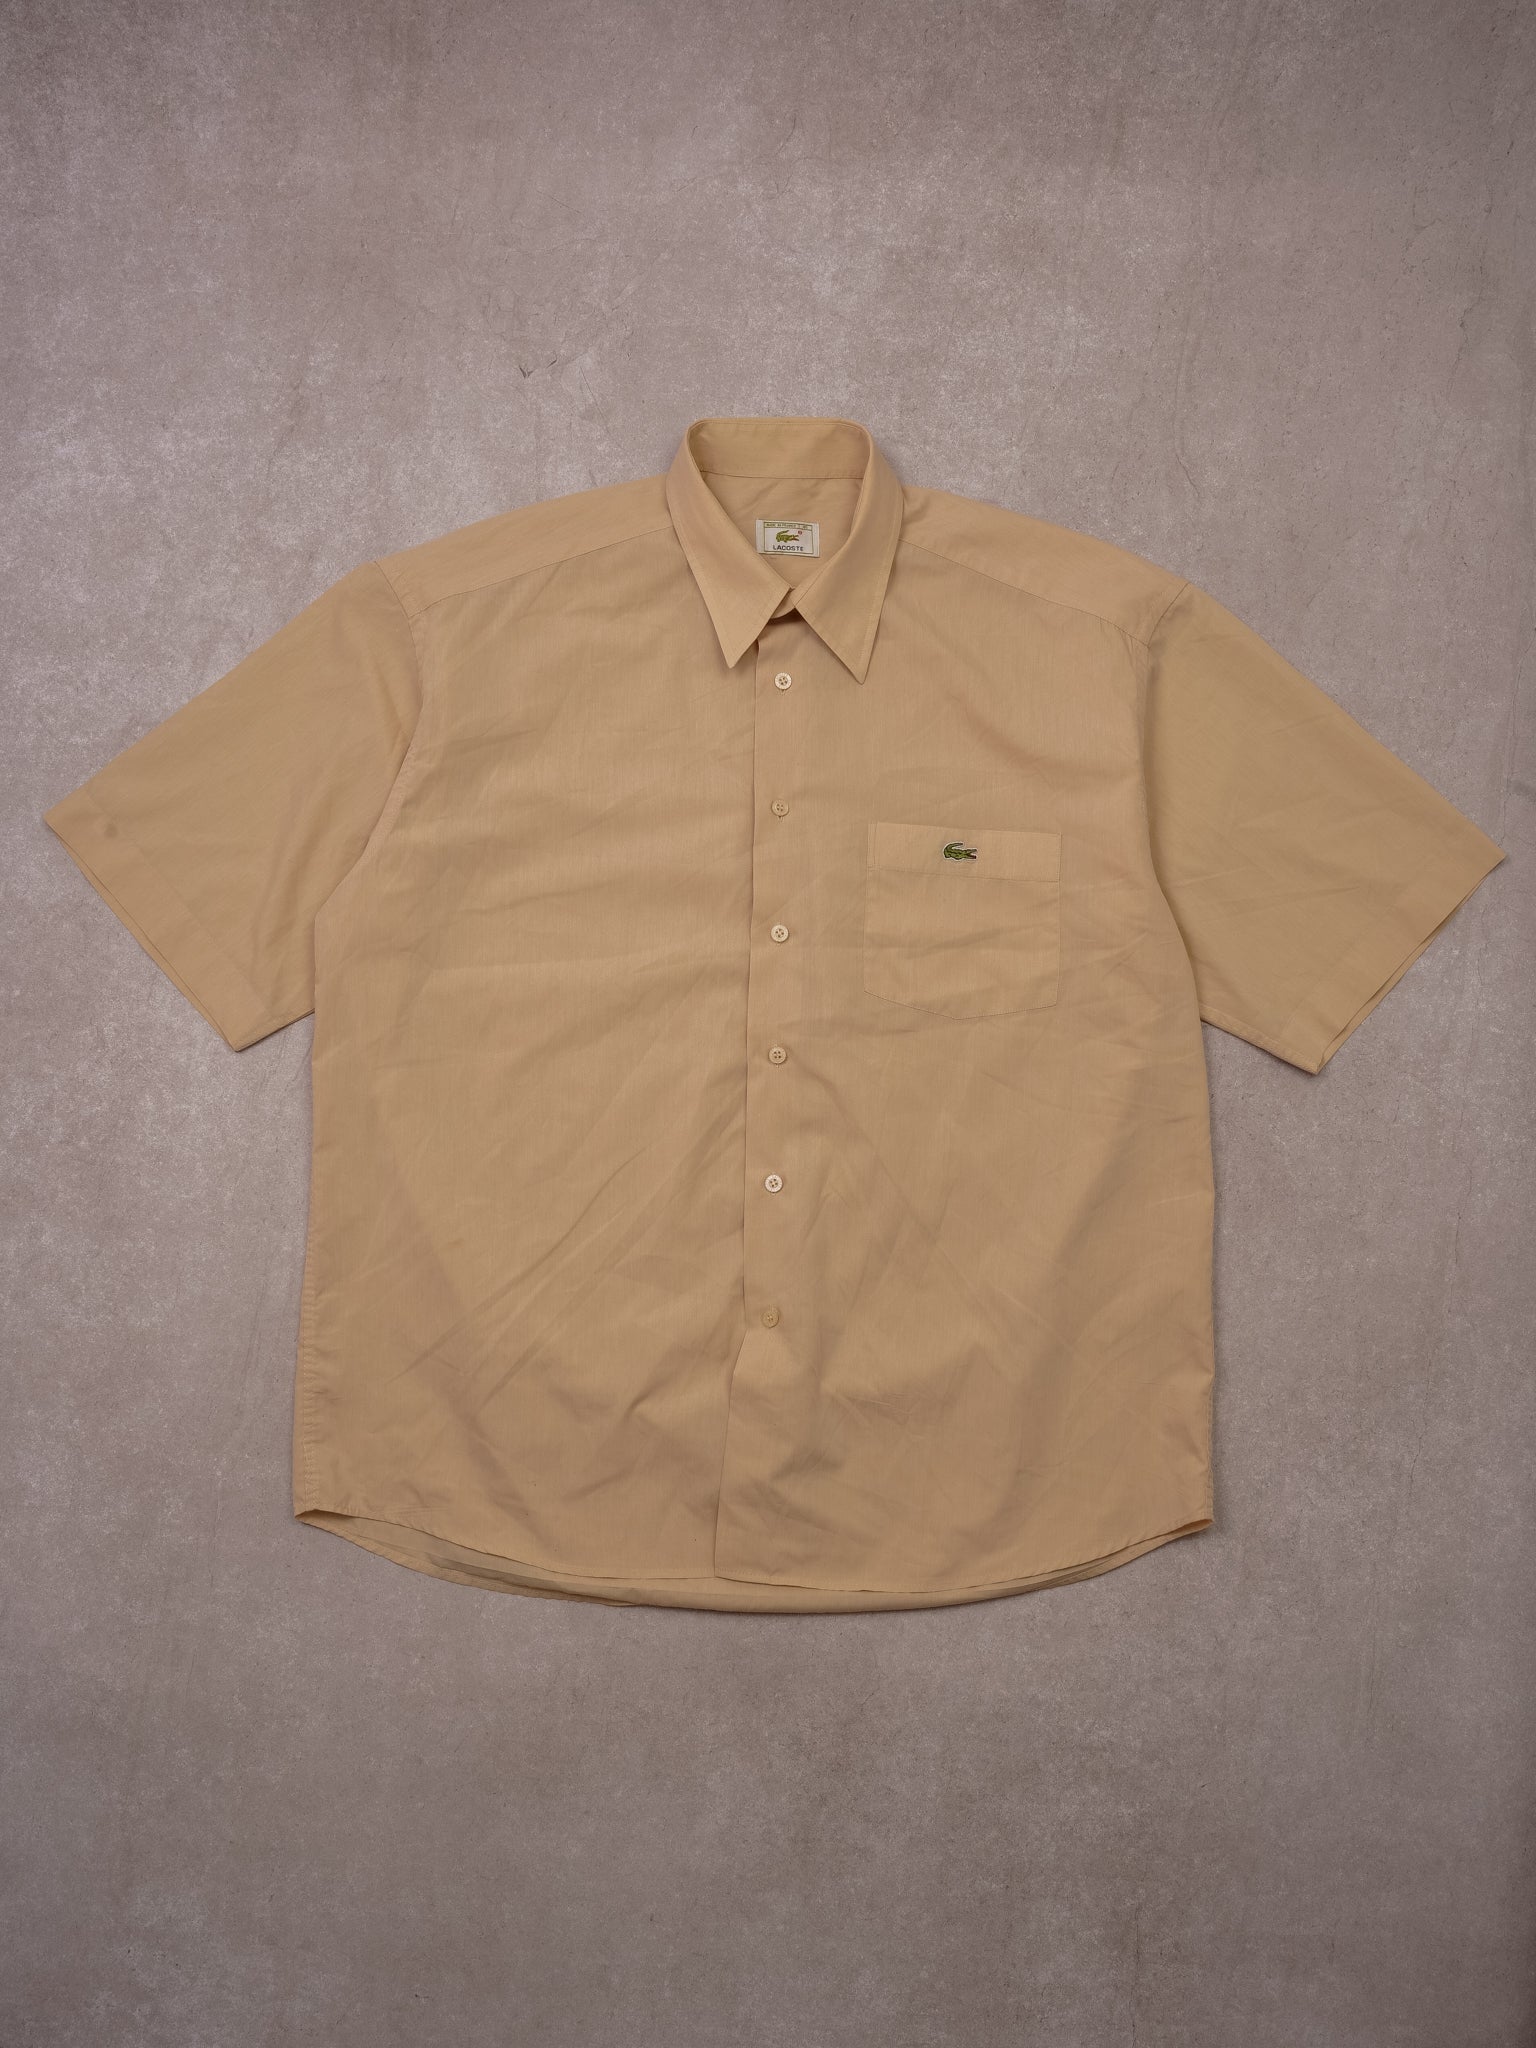 Vintage 80s Lacoste Beige Collared Short Sleeve Button Up (L)